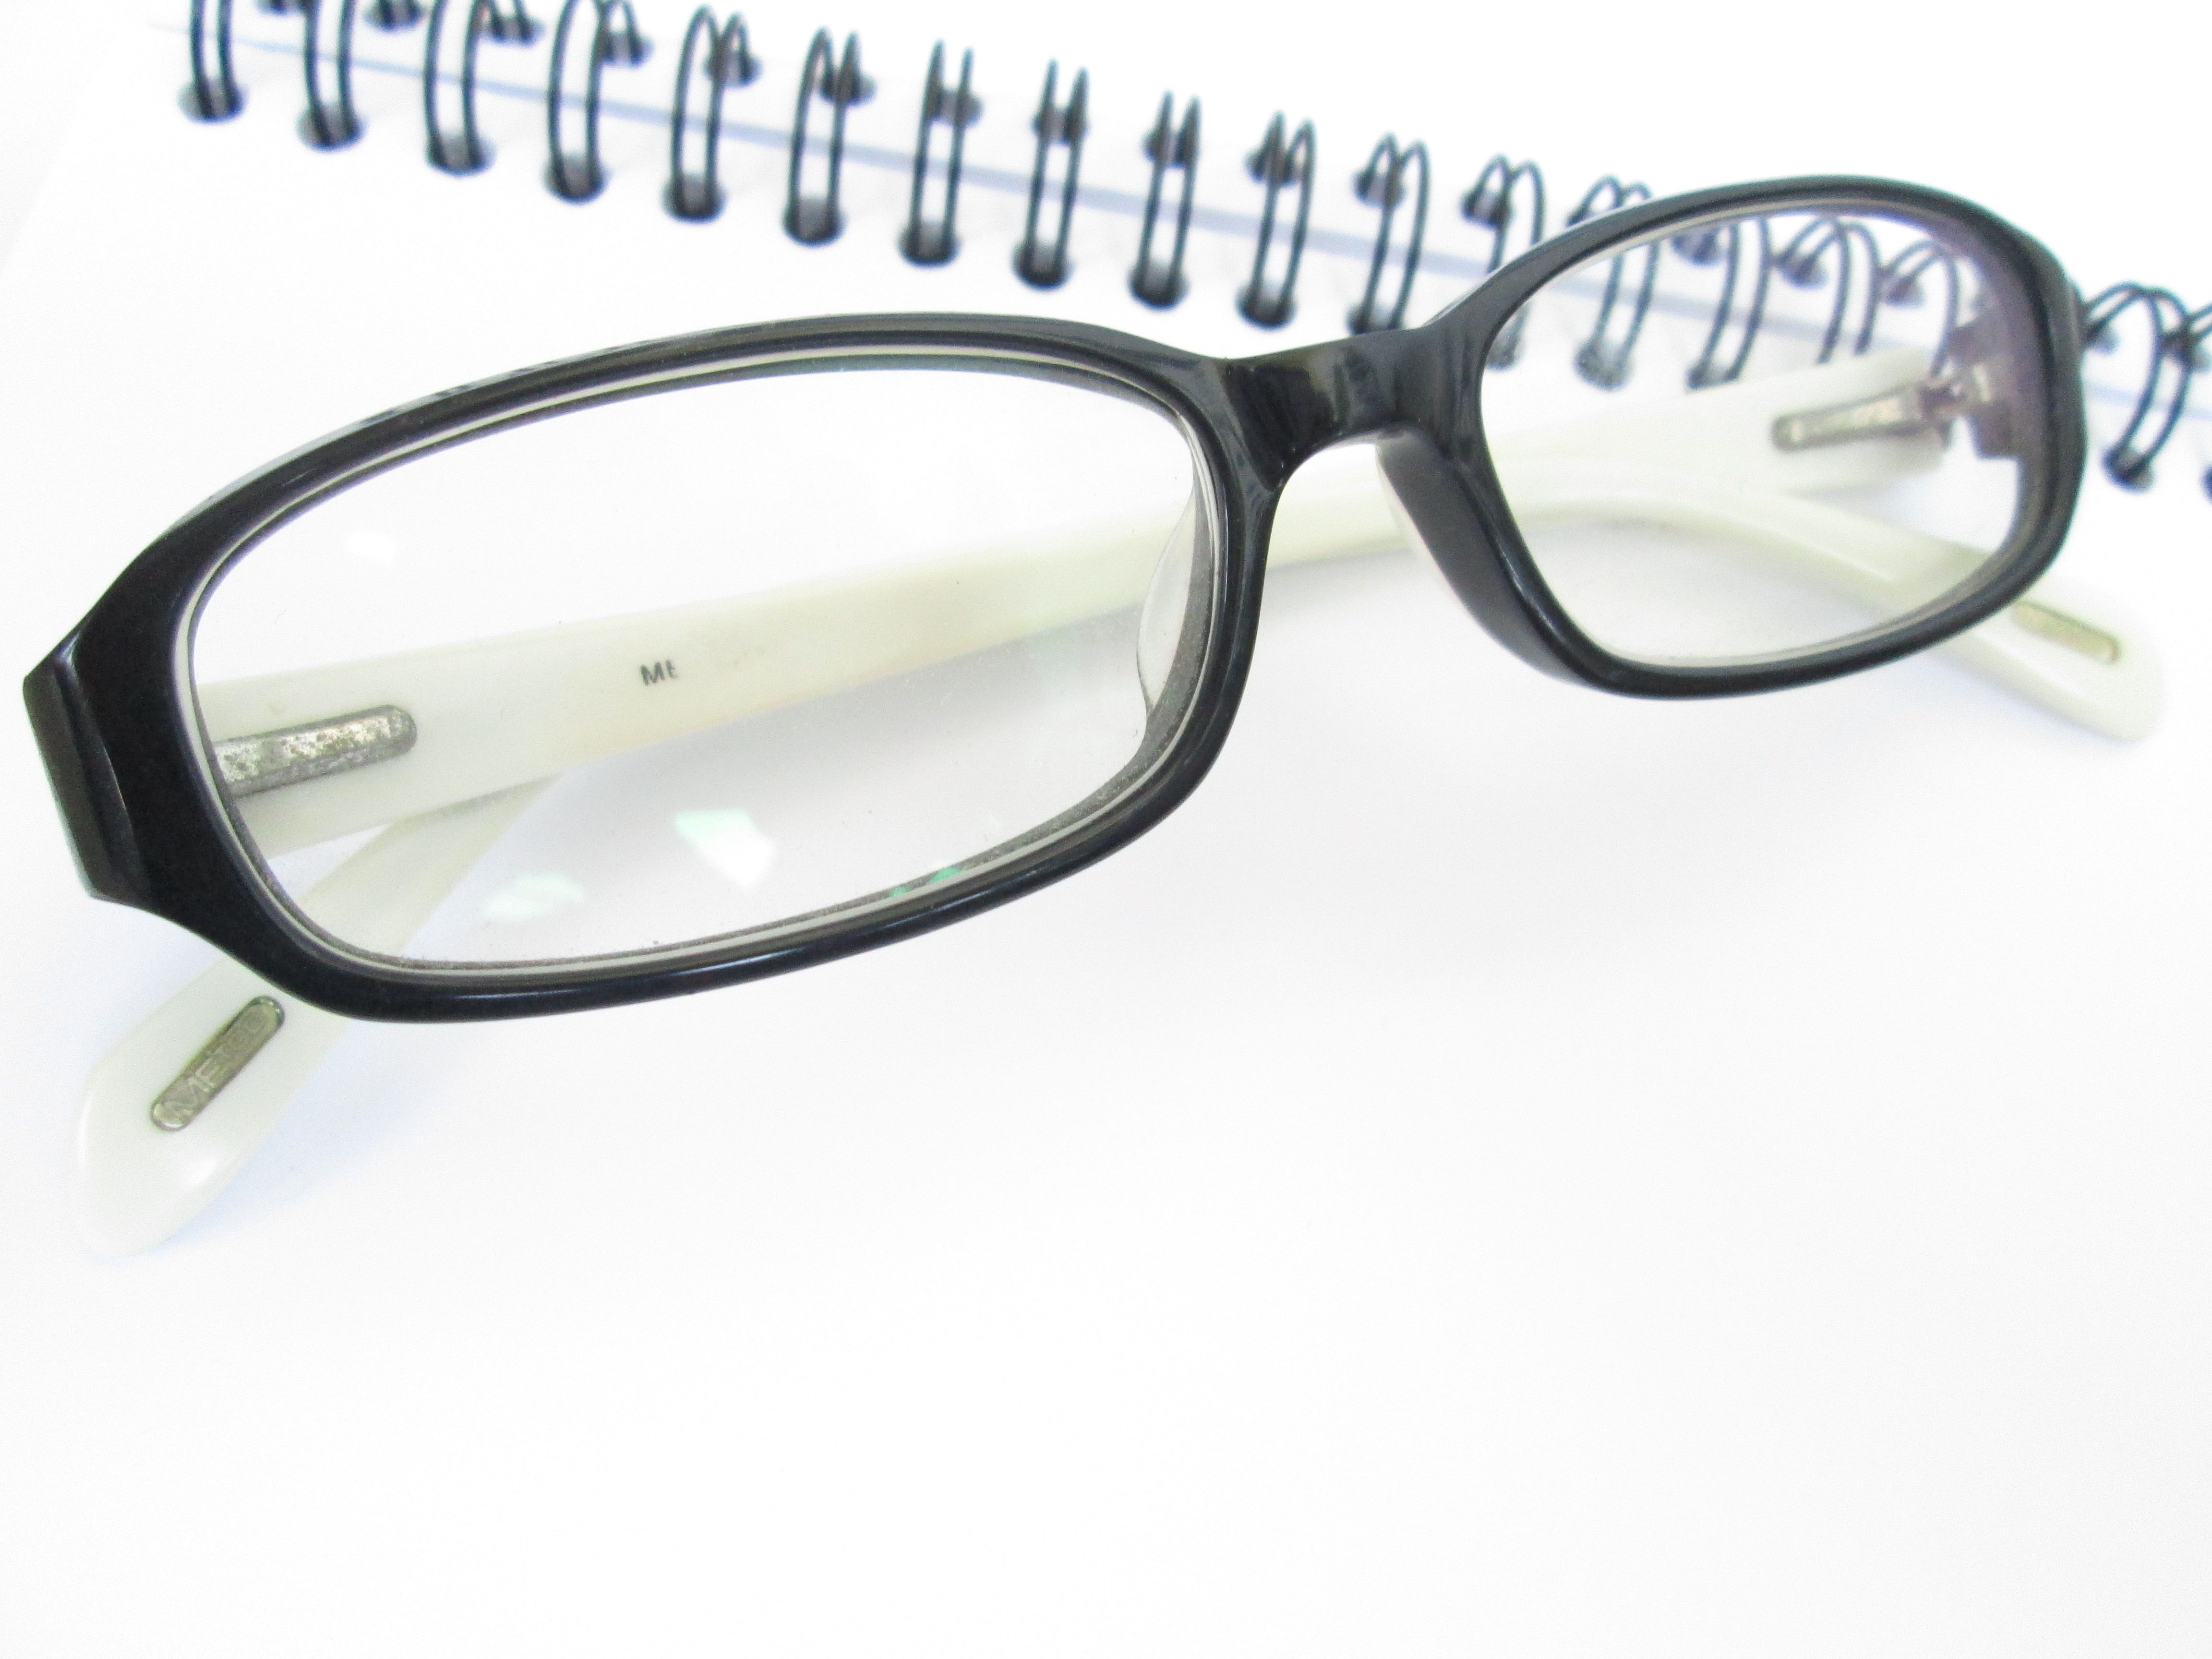 Eye glasses with book photo